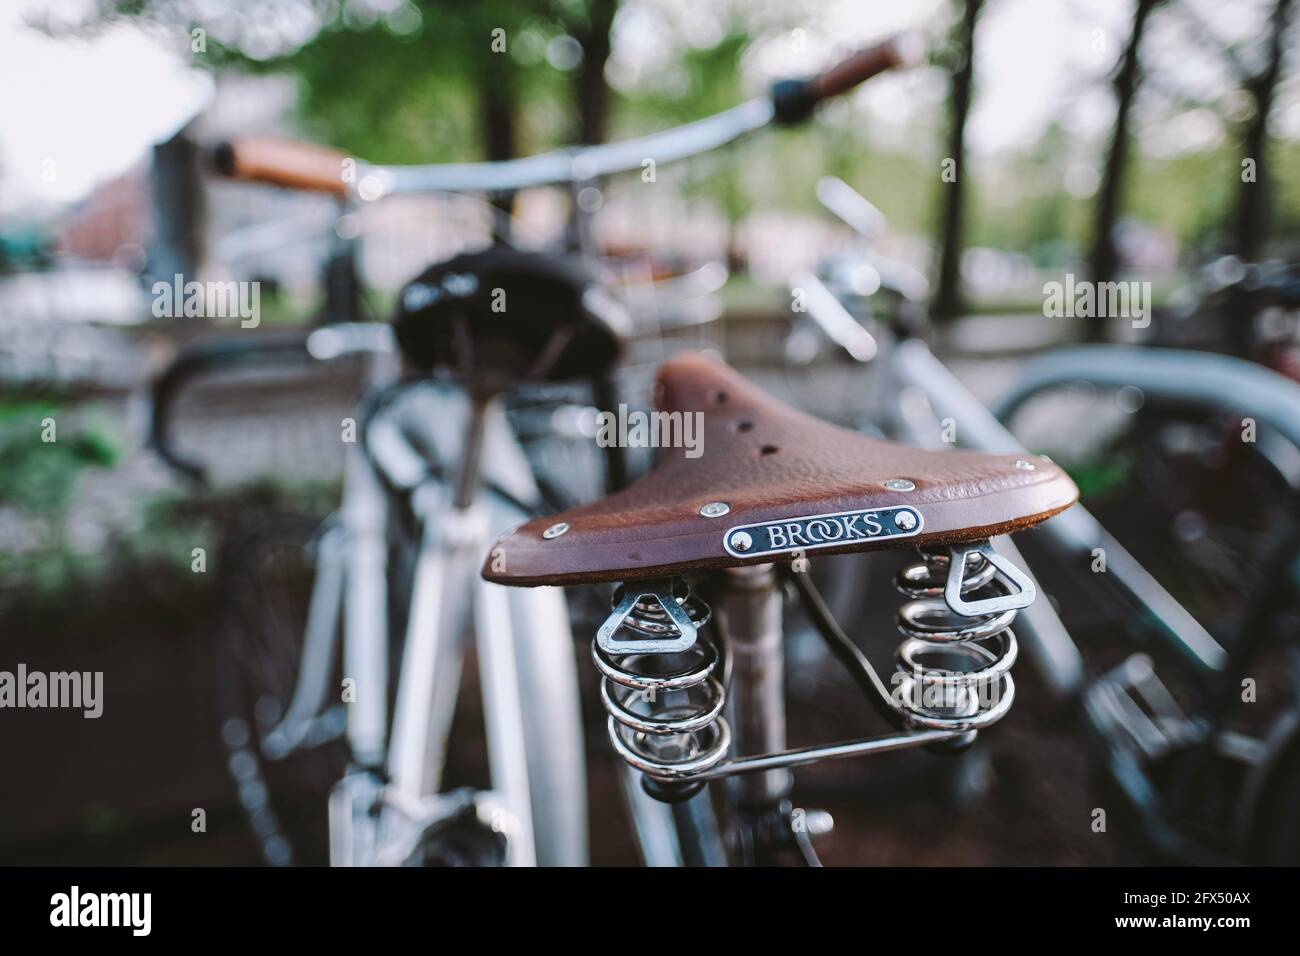 Oslo, Norway - 05/22/2021: Brooks bicycle leather seat at Sagene area in Oslo, Norway, Scandinavia with a colourful background in front of public park Stock Photo